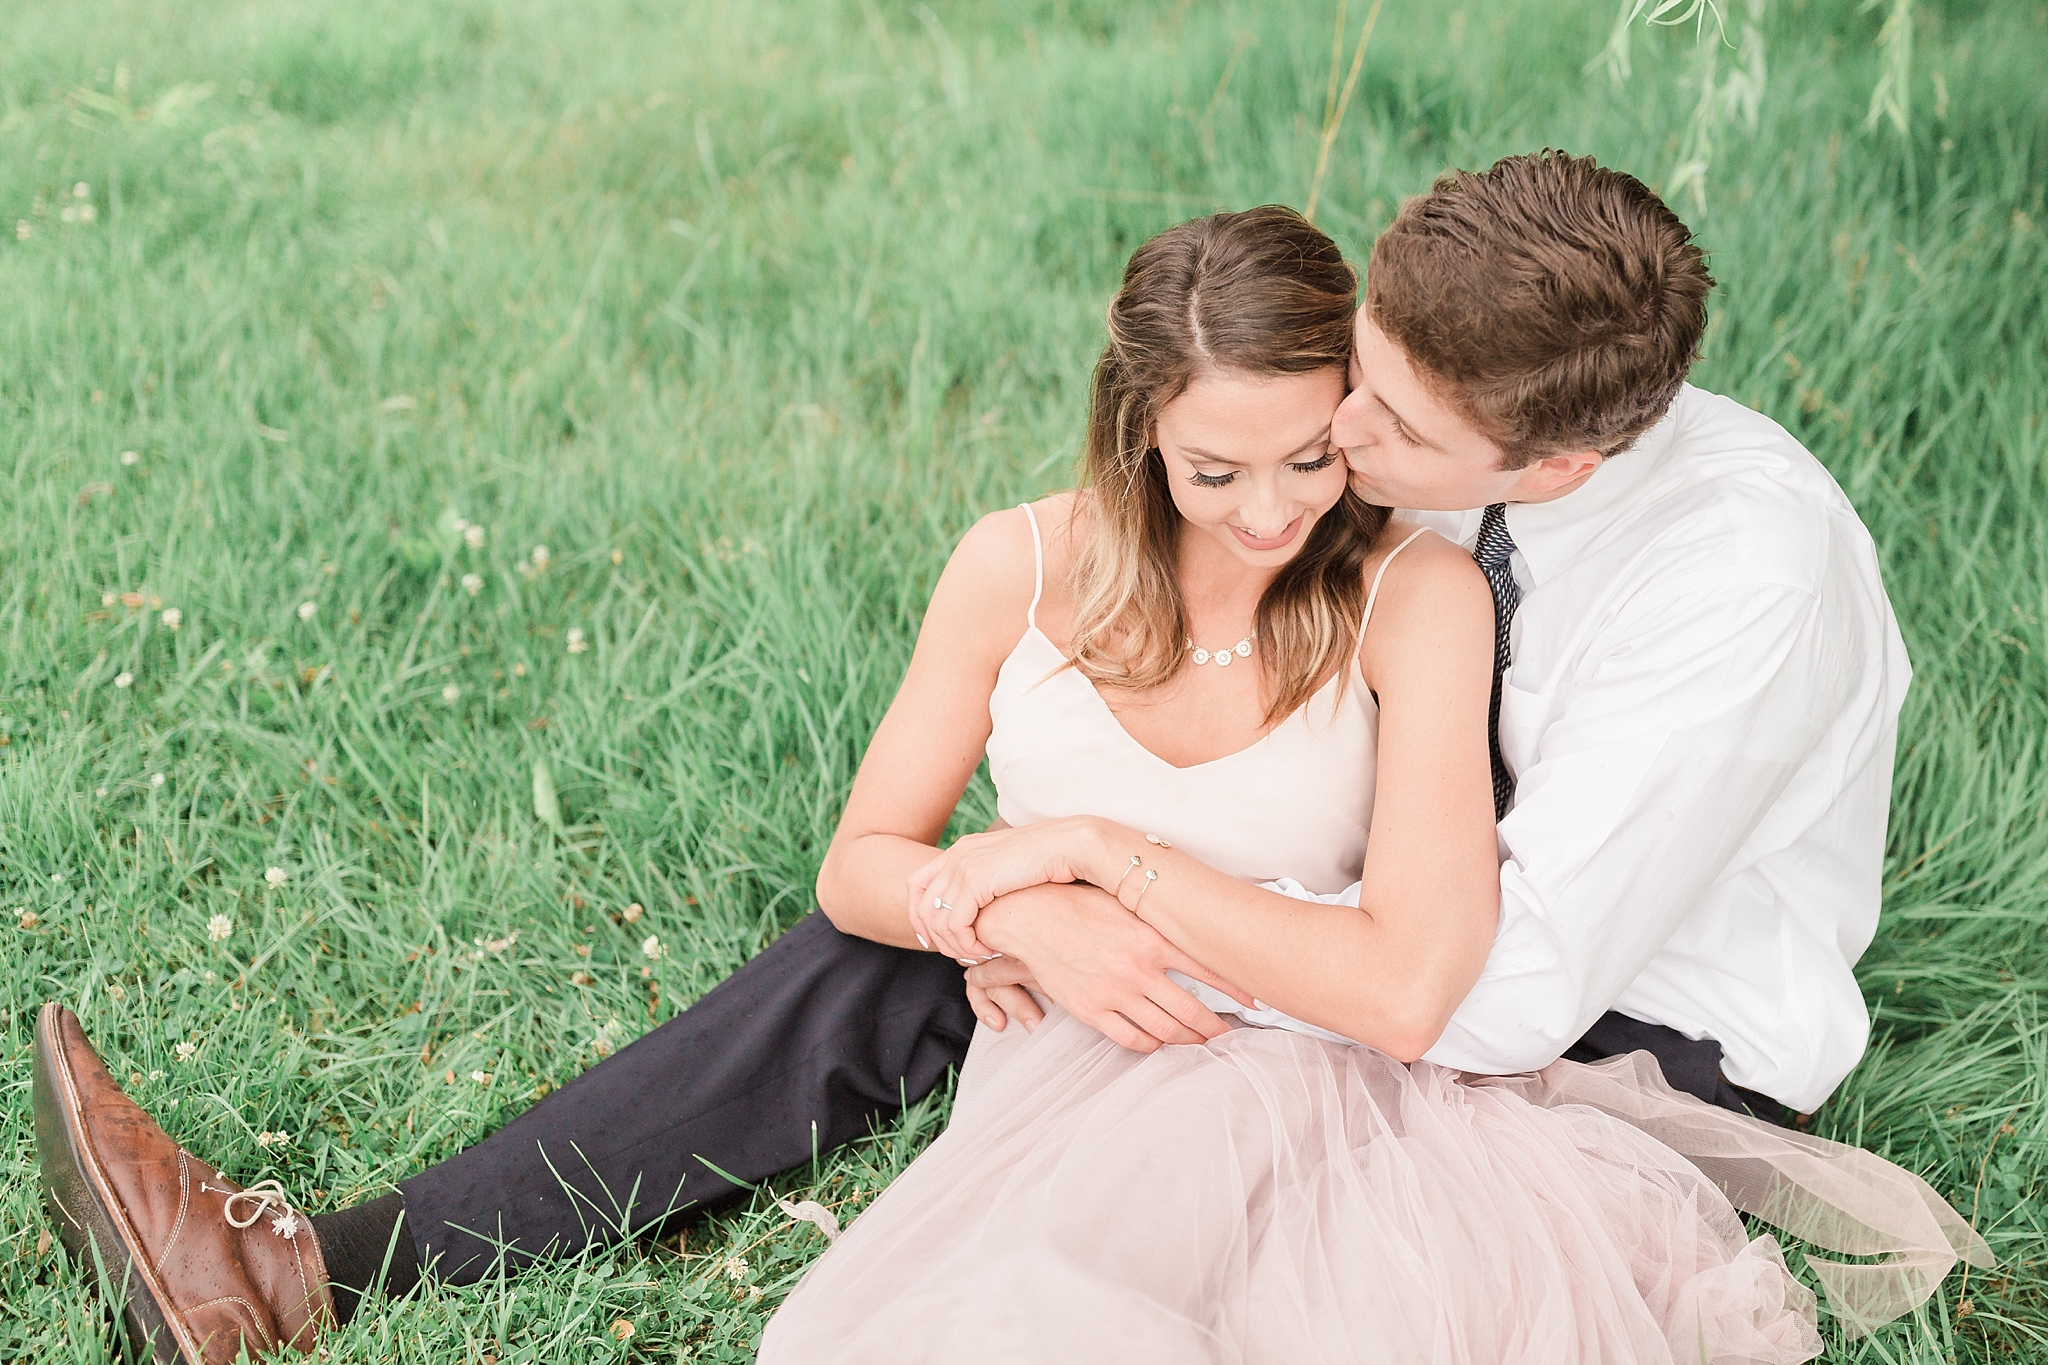 A beautiful summer engagement session is photographed at Pearmund Cellars in Warrenton, VA.